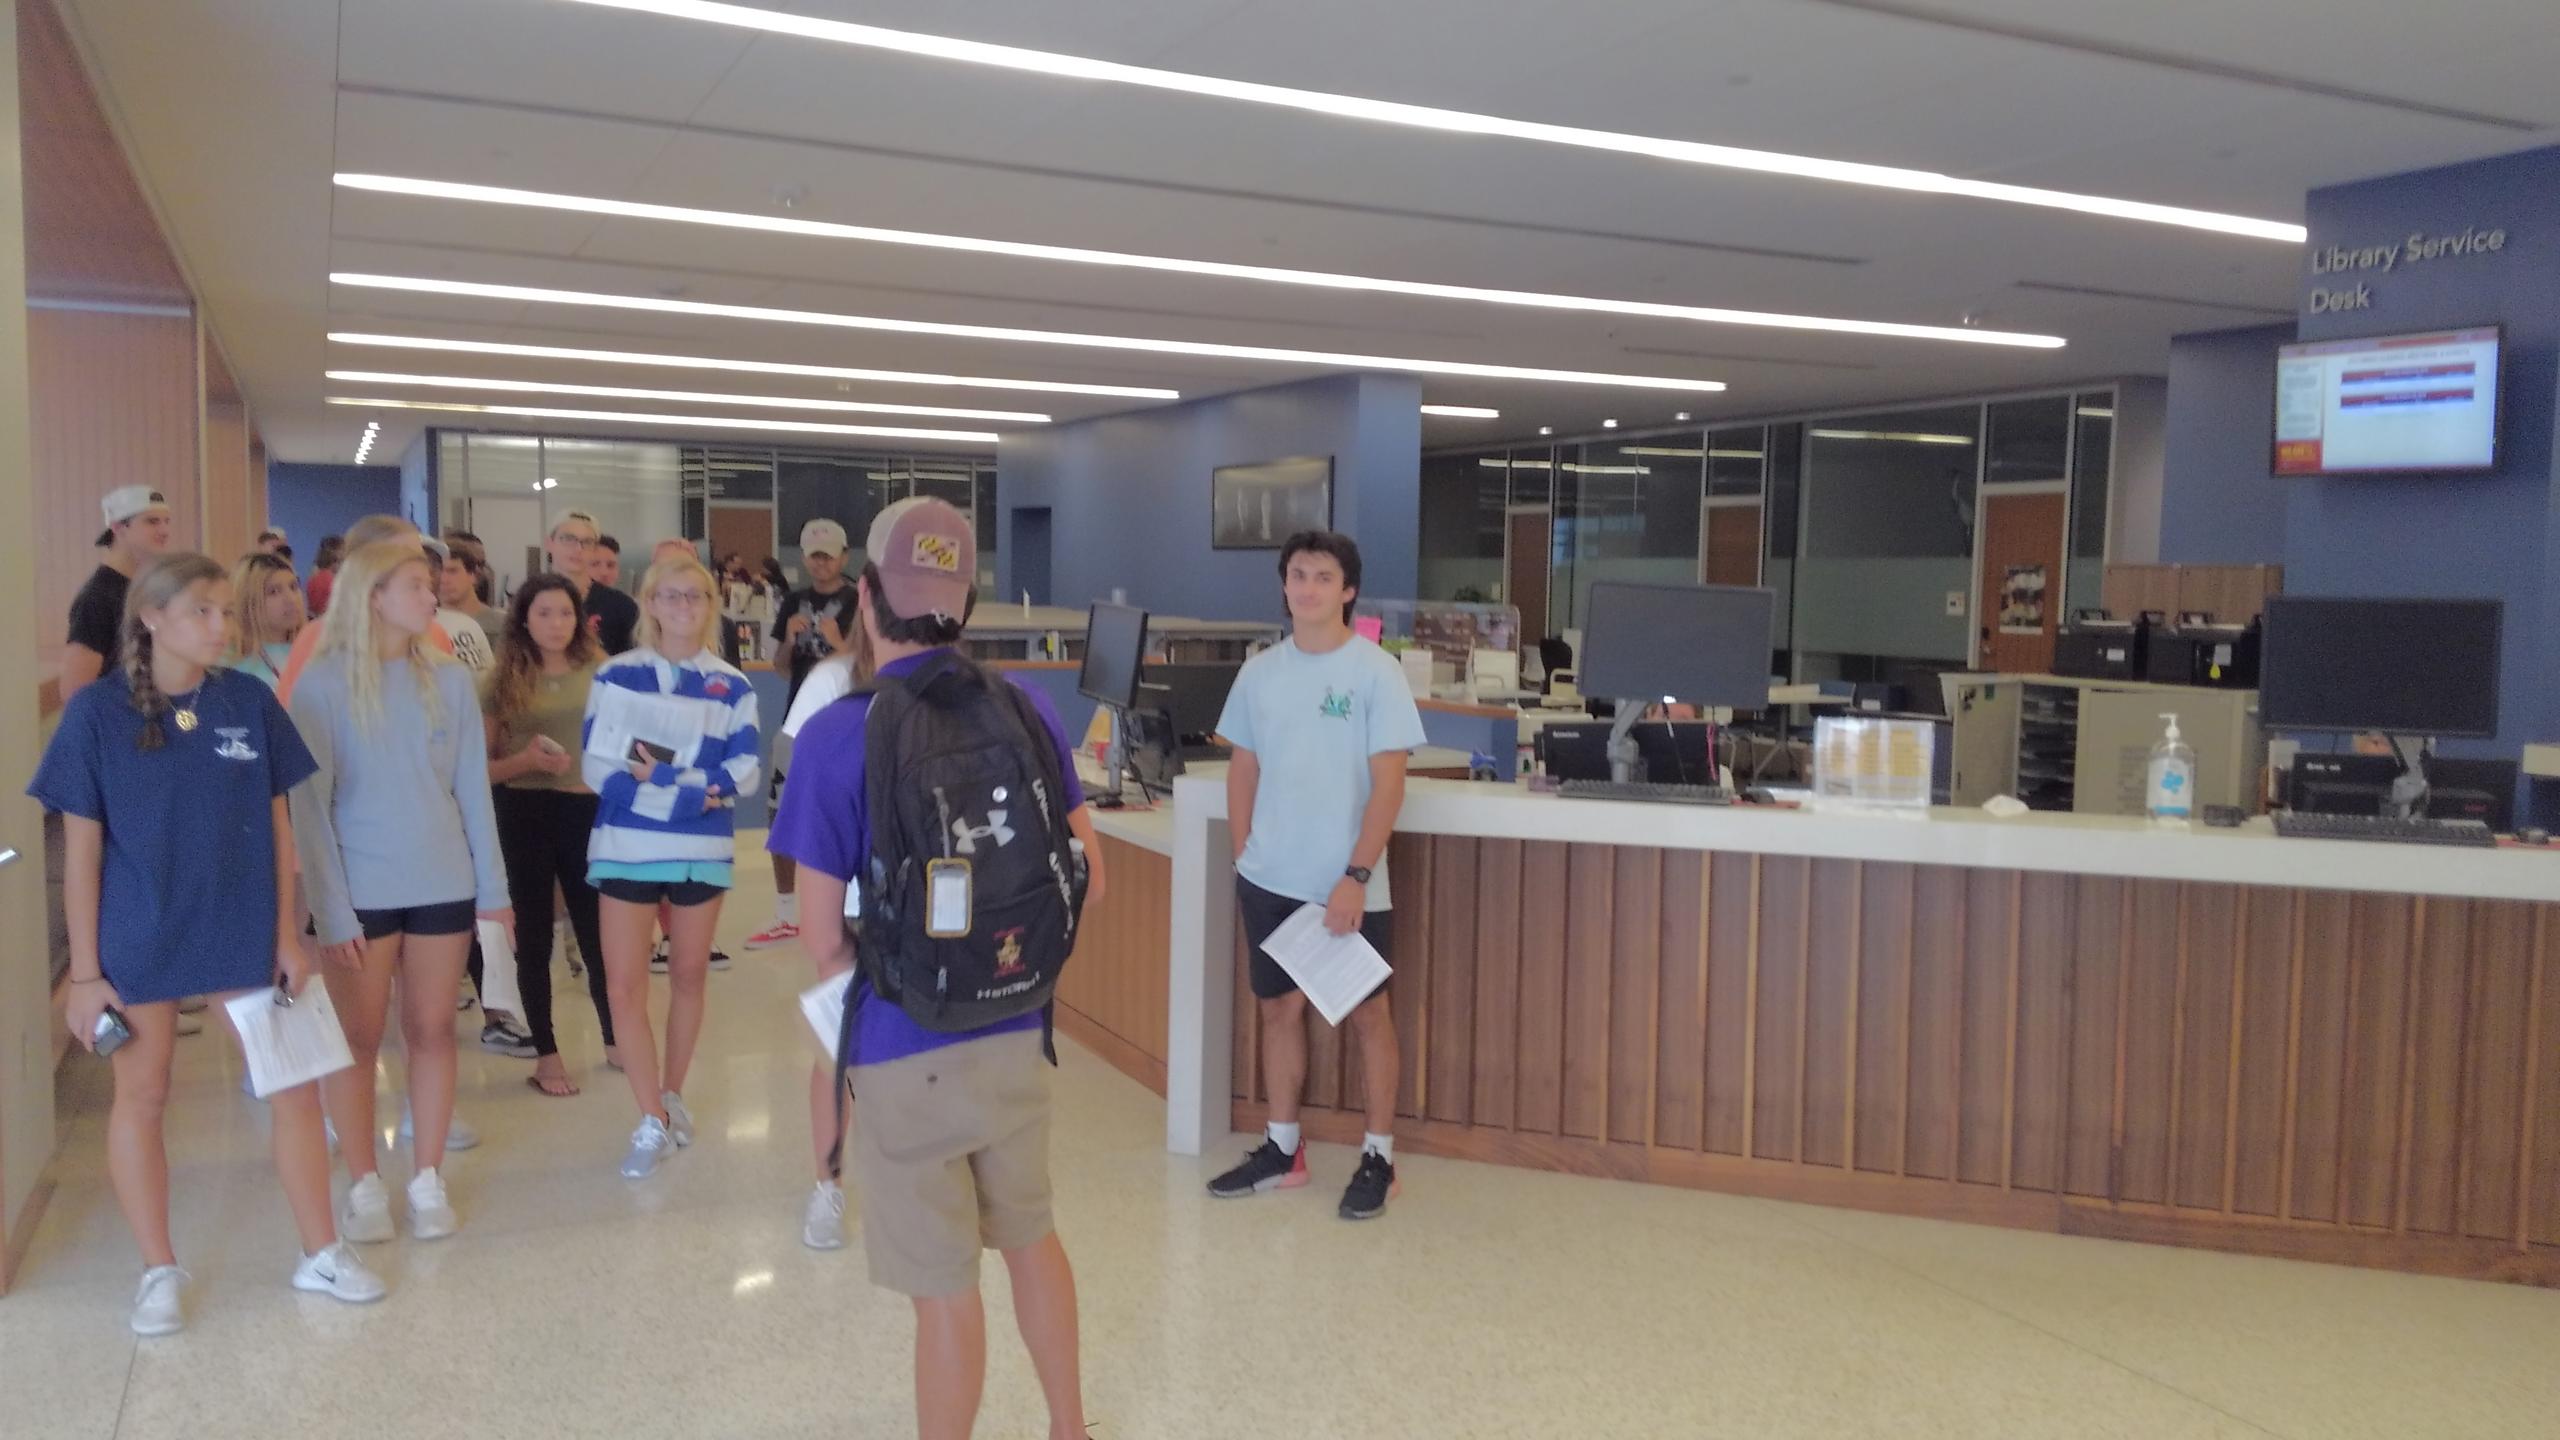 Students touring the Library Service Desk in the GAC